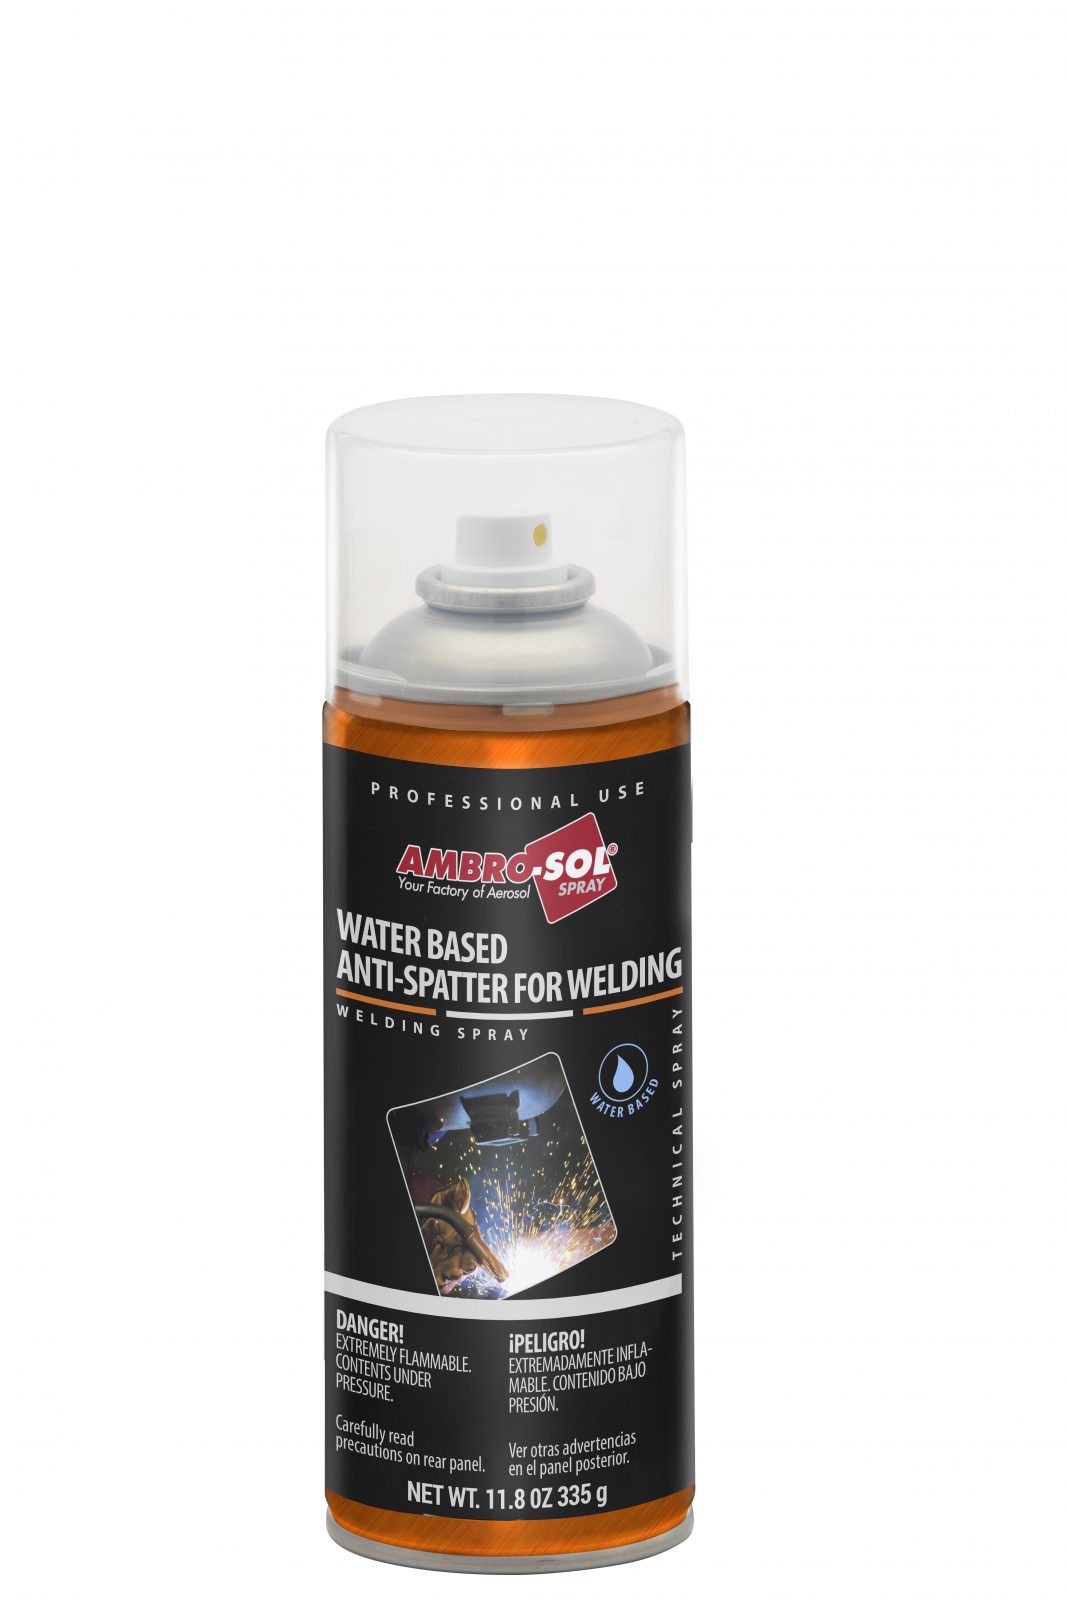 The Water Based Anti-Spatter prevents welding spatter from adhering to surrounding metal surfaces, making all of your welding projects that much cleaner!